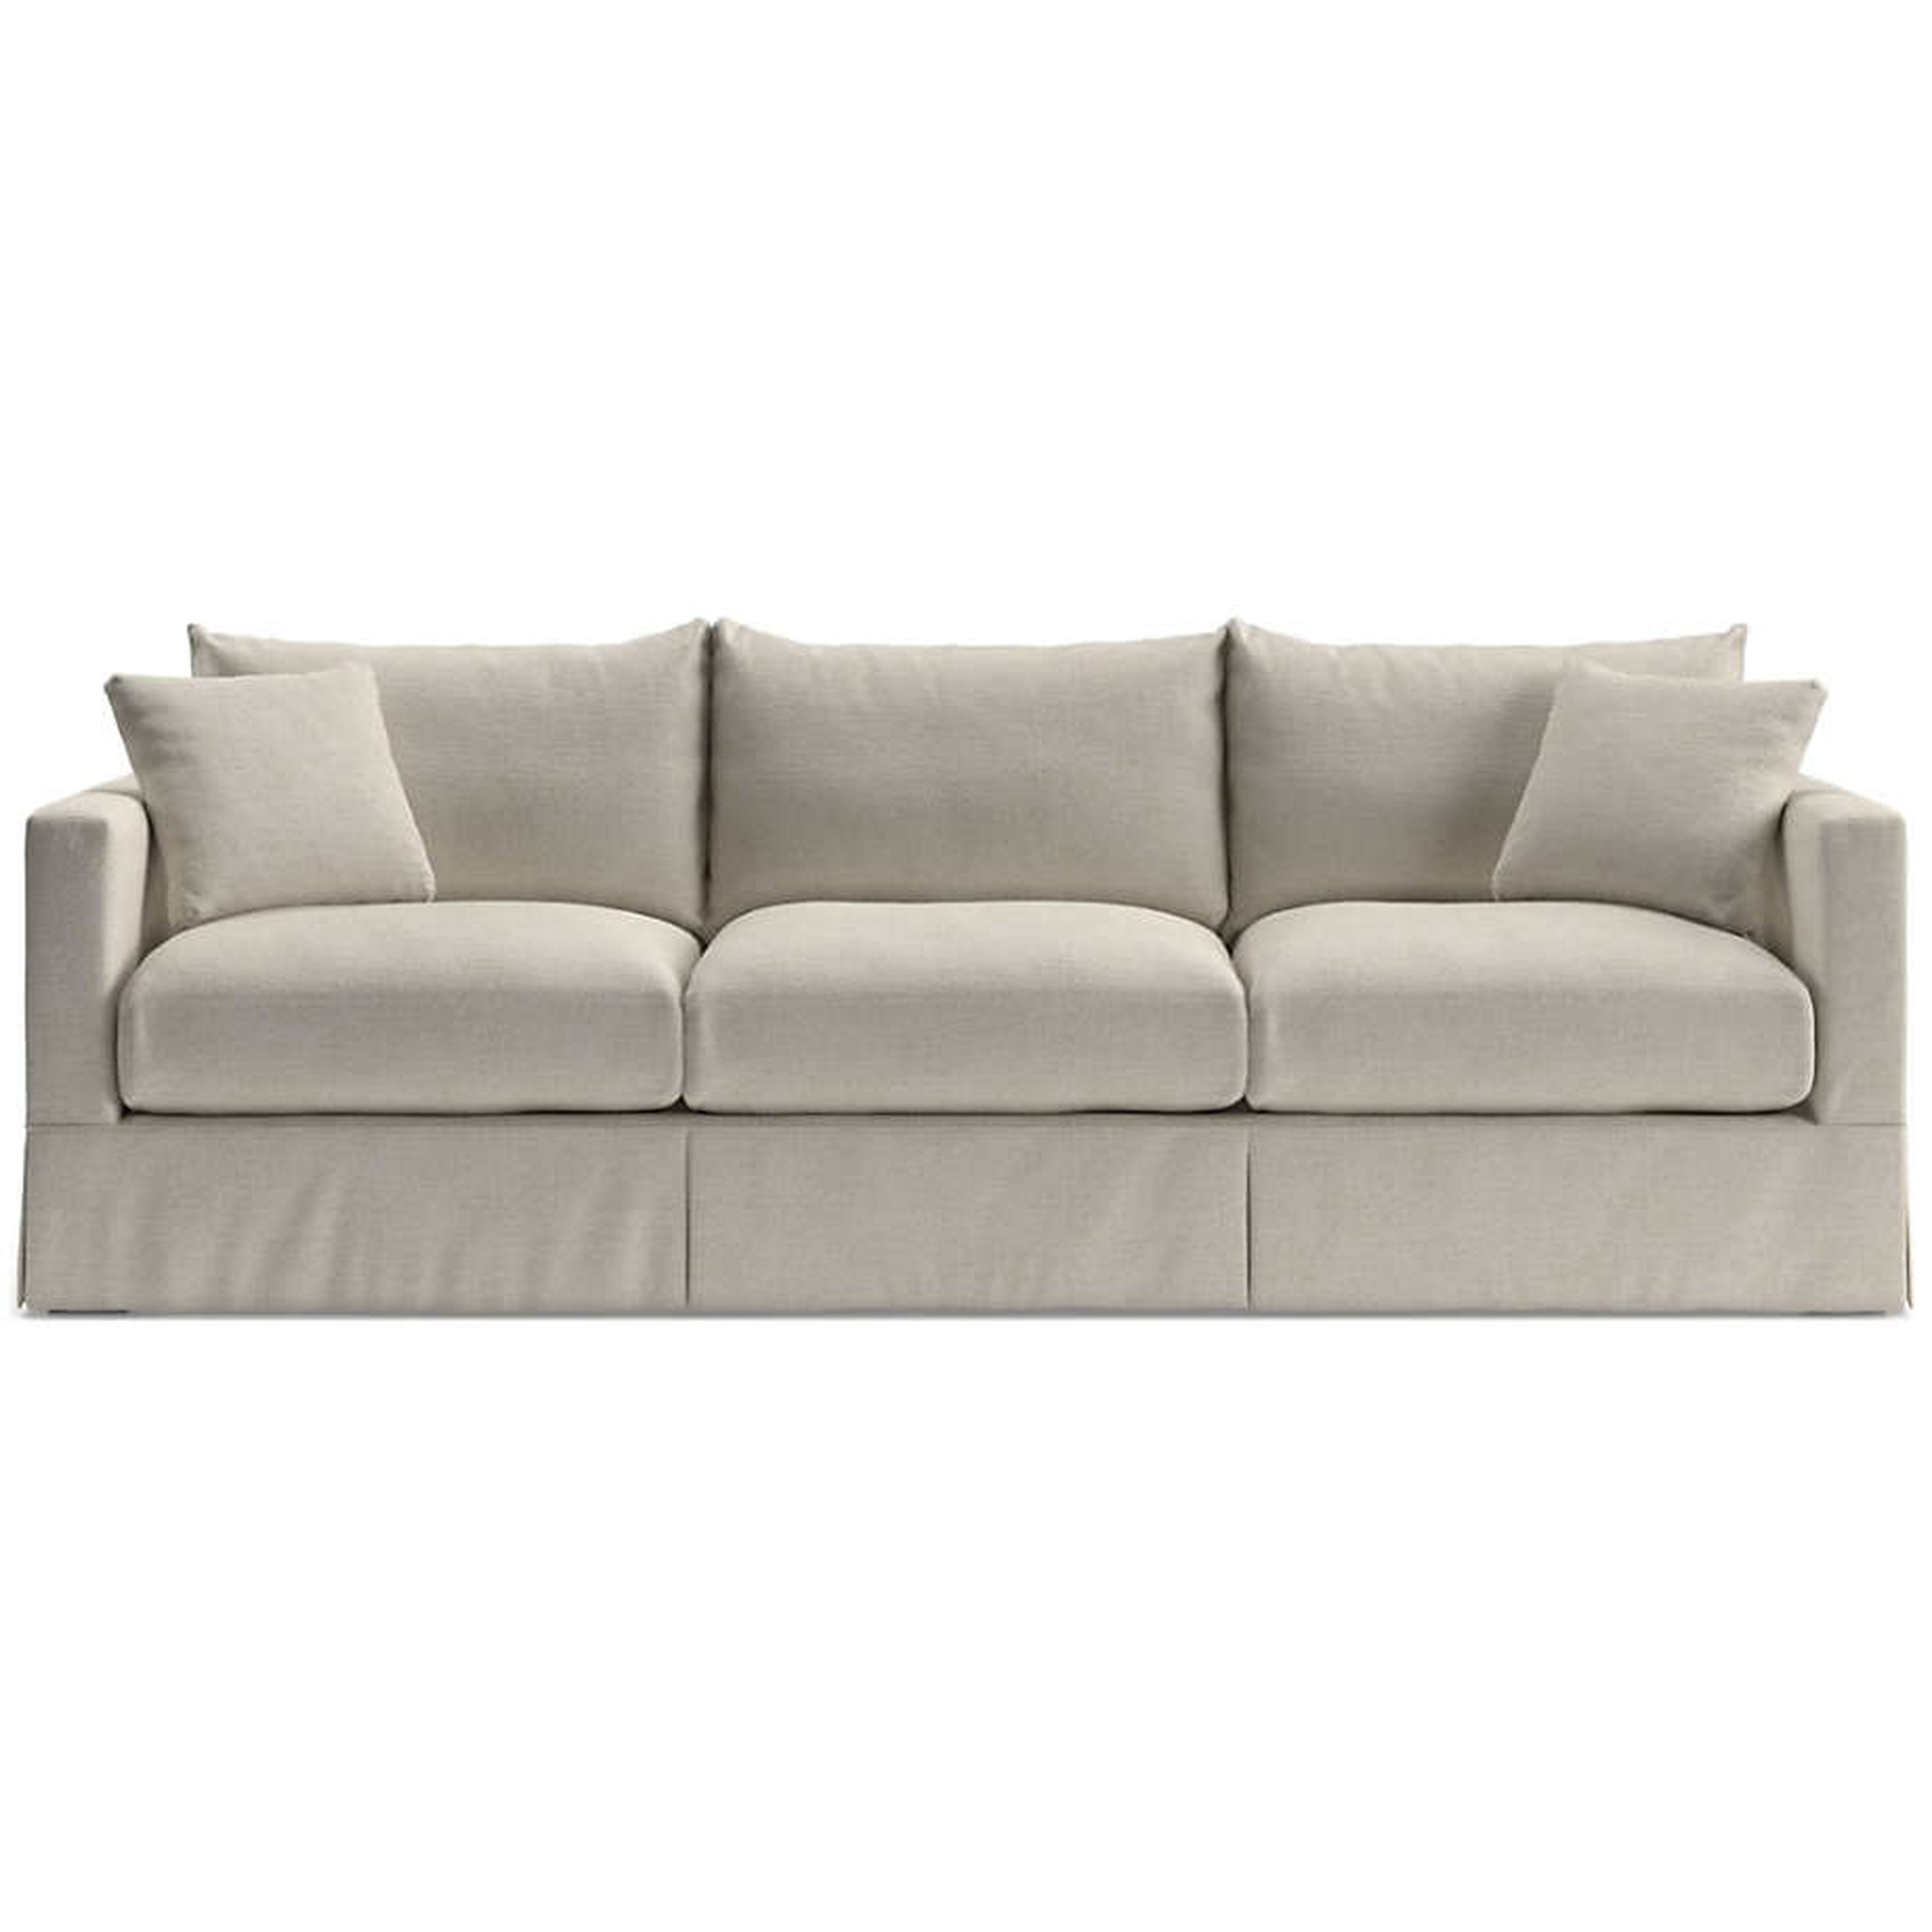 Willow 103" Grande Modern Slipcovered Sofa - Monet Champagne - Crate and Barrel